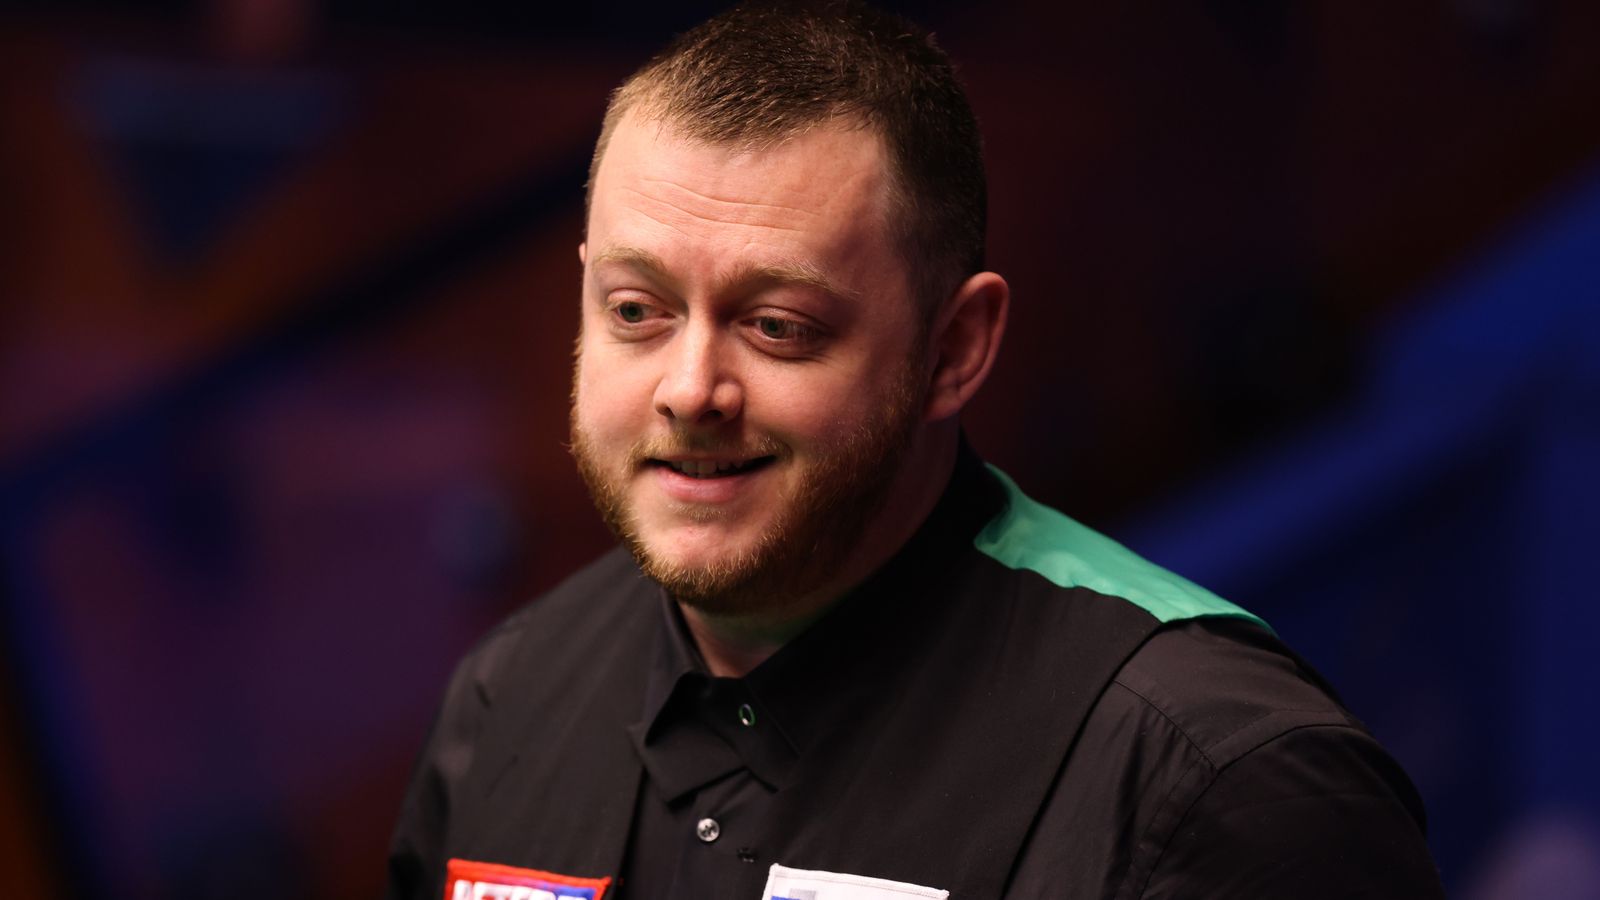 Mark Allen wins maiden Northern Ireland Open title with victory against